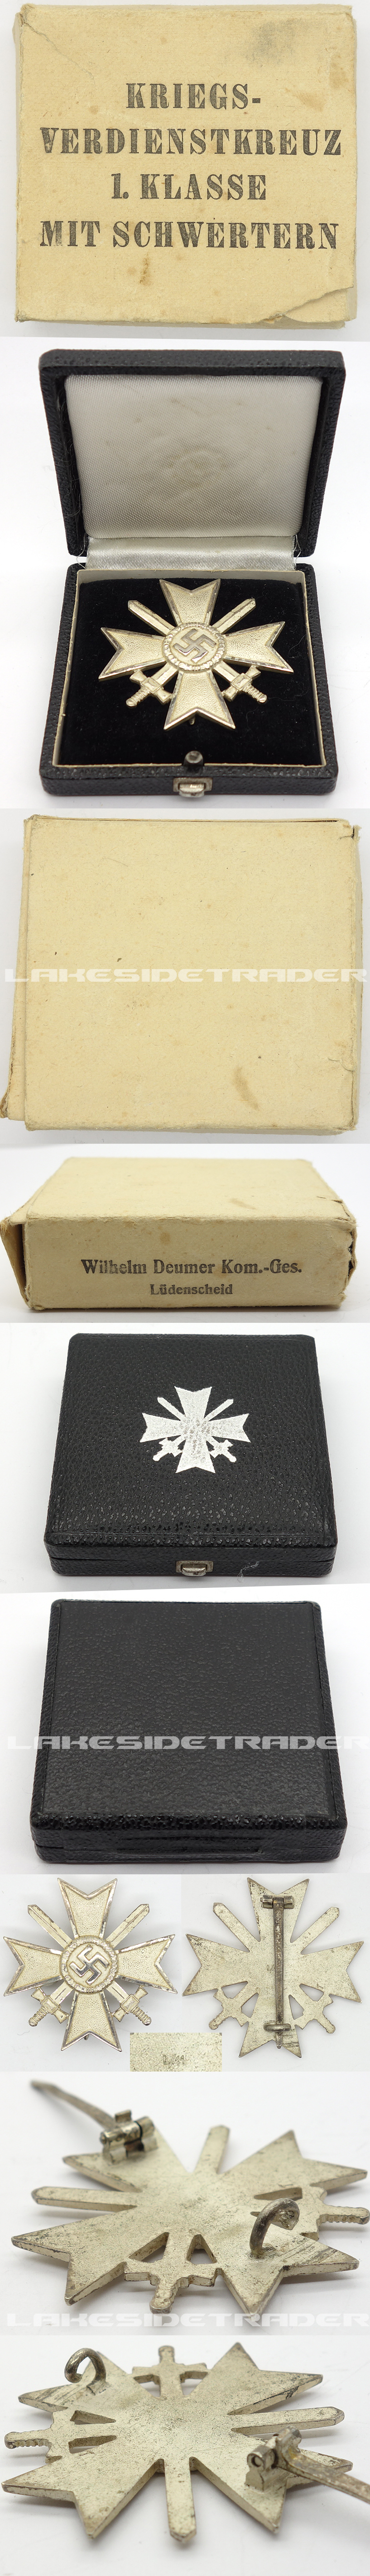 Minty Matching Boxed & Cased 1st Class War Merit Cross by Deumer